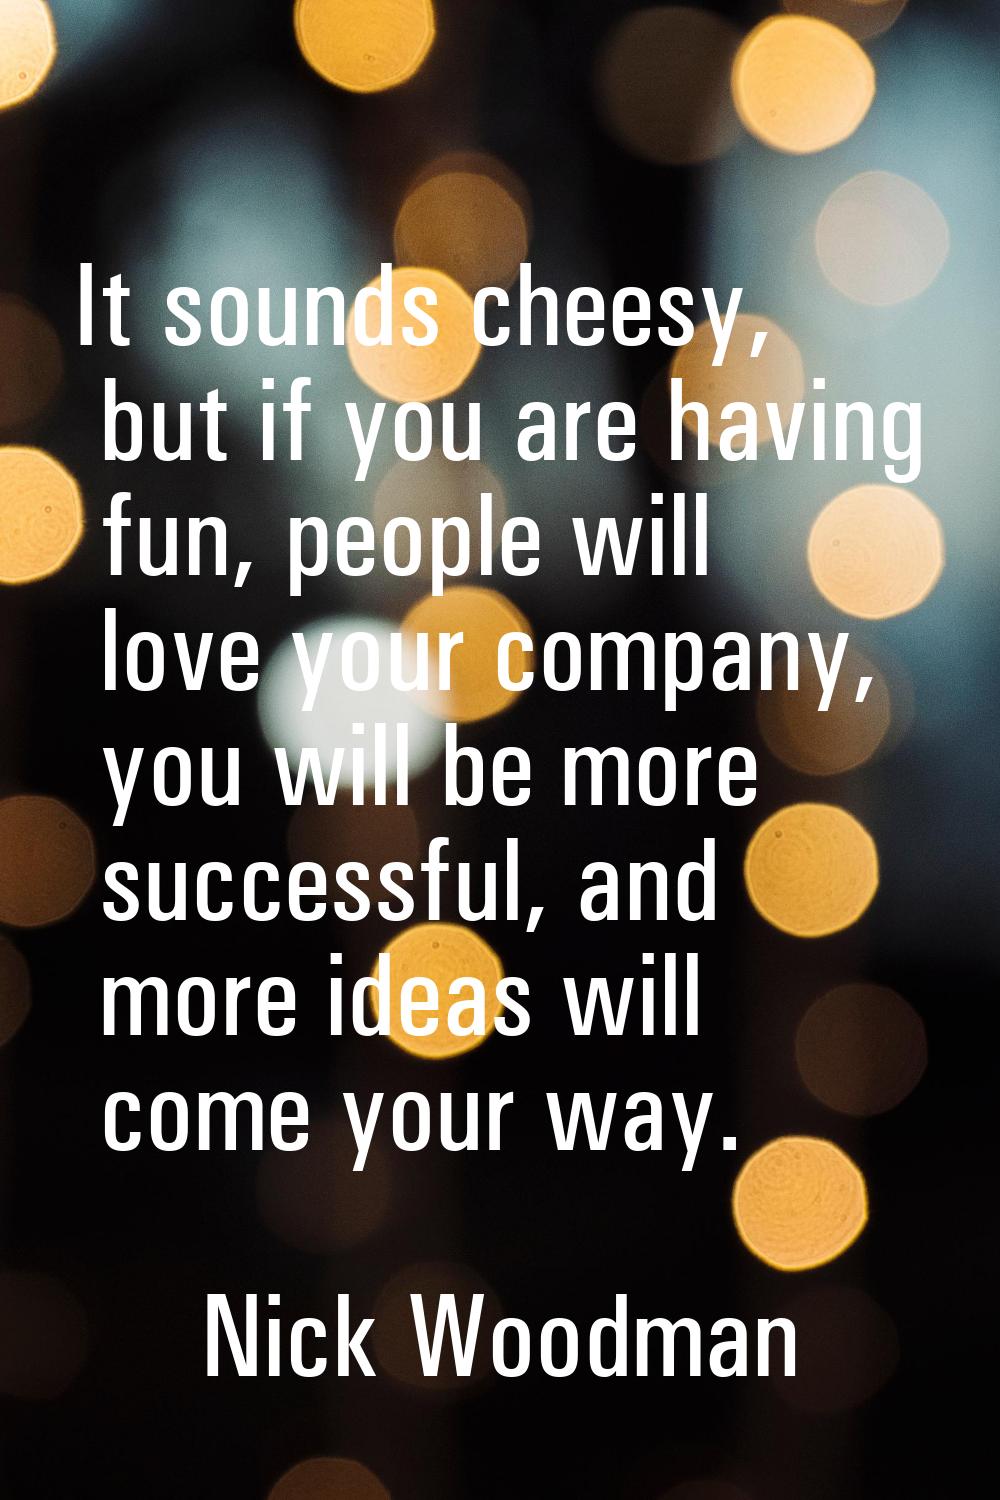 It sounds cheesy, but if you are having fun, people will love your company, you will be more succes